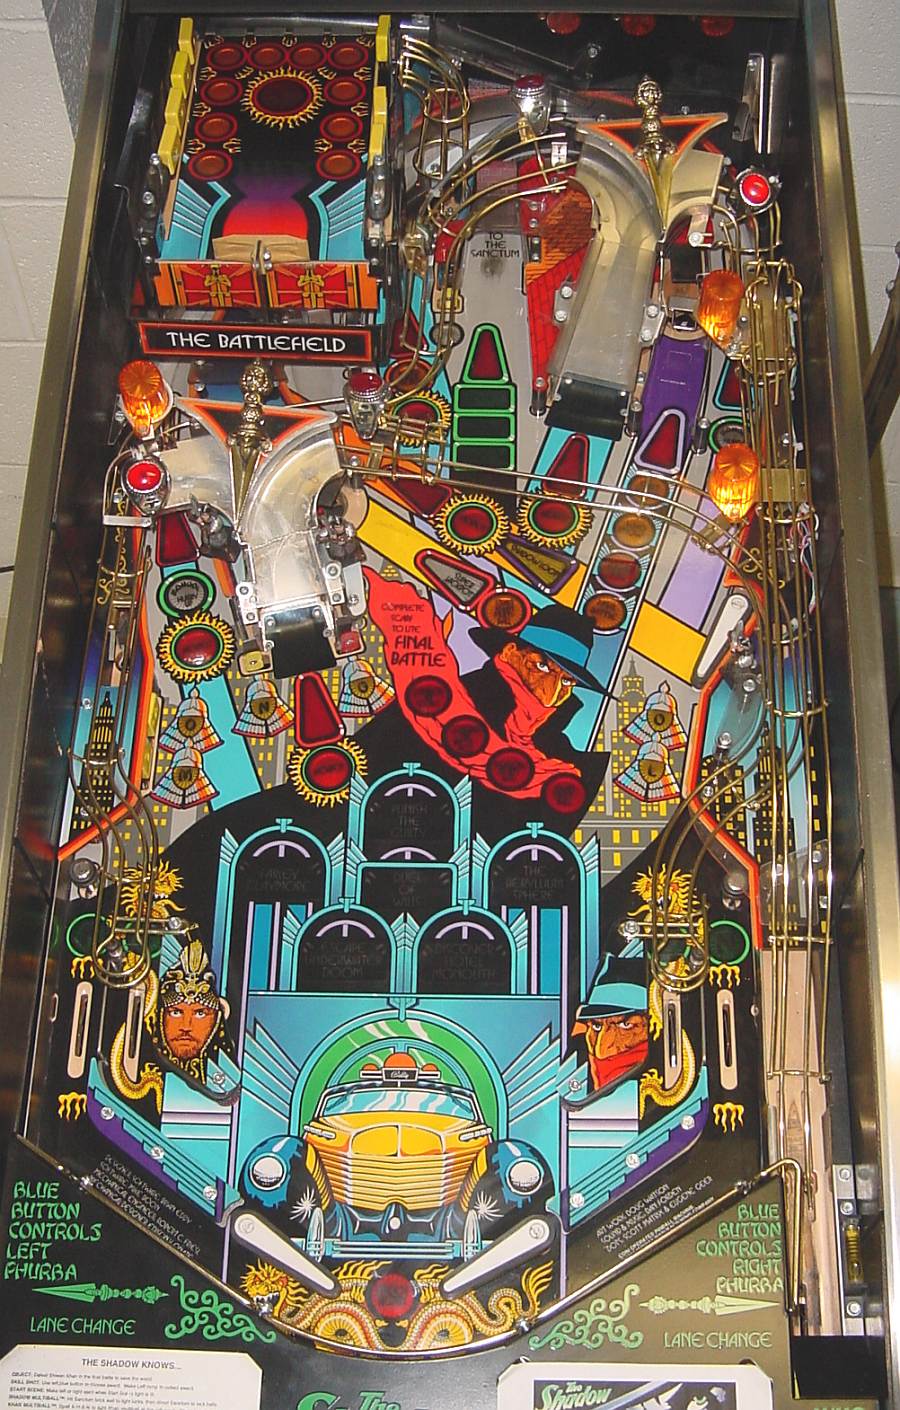 Jeff's Pinball Pages